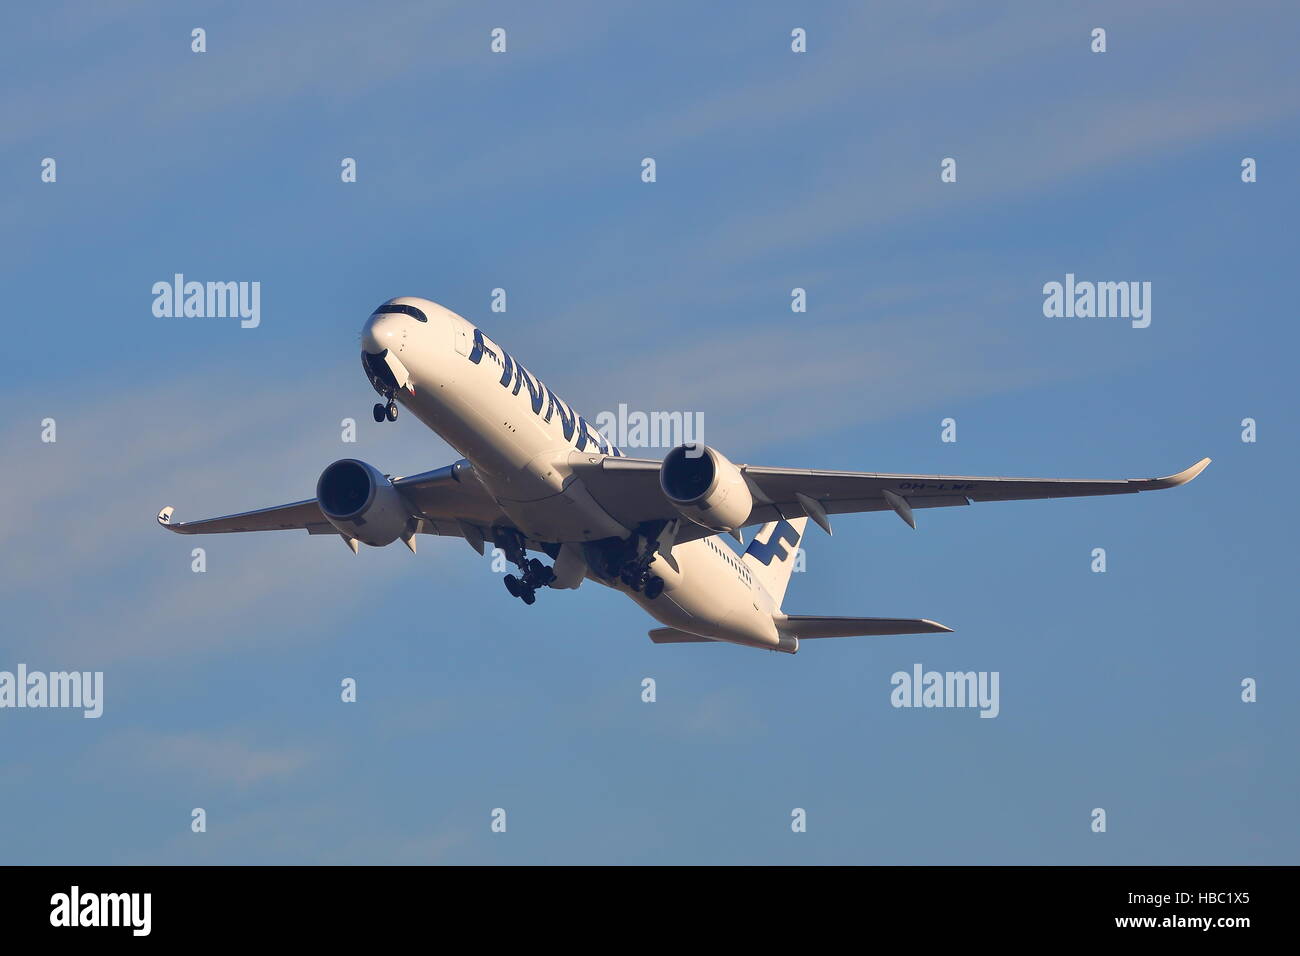 Finnair Airbus A350-900 OH-LWE departing from London Heathrow Airport, UK Stock Photo